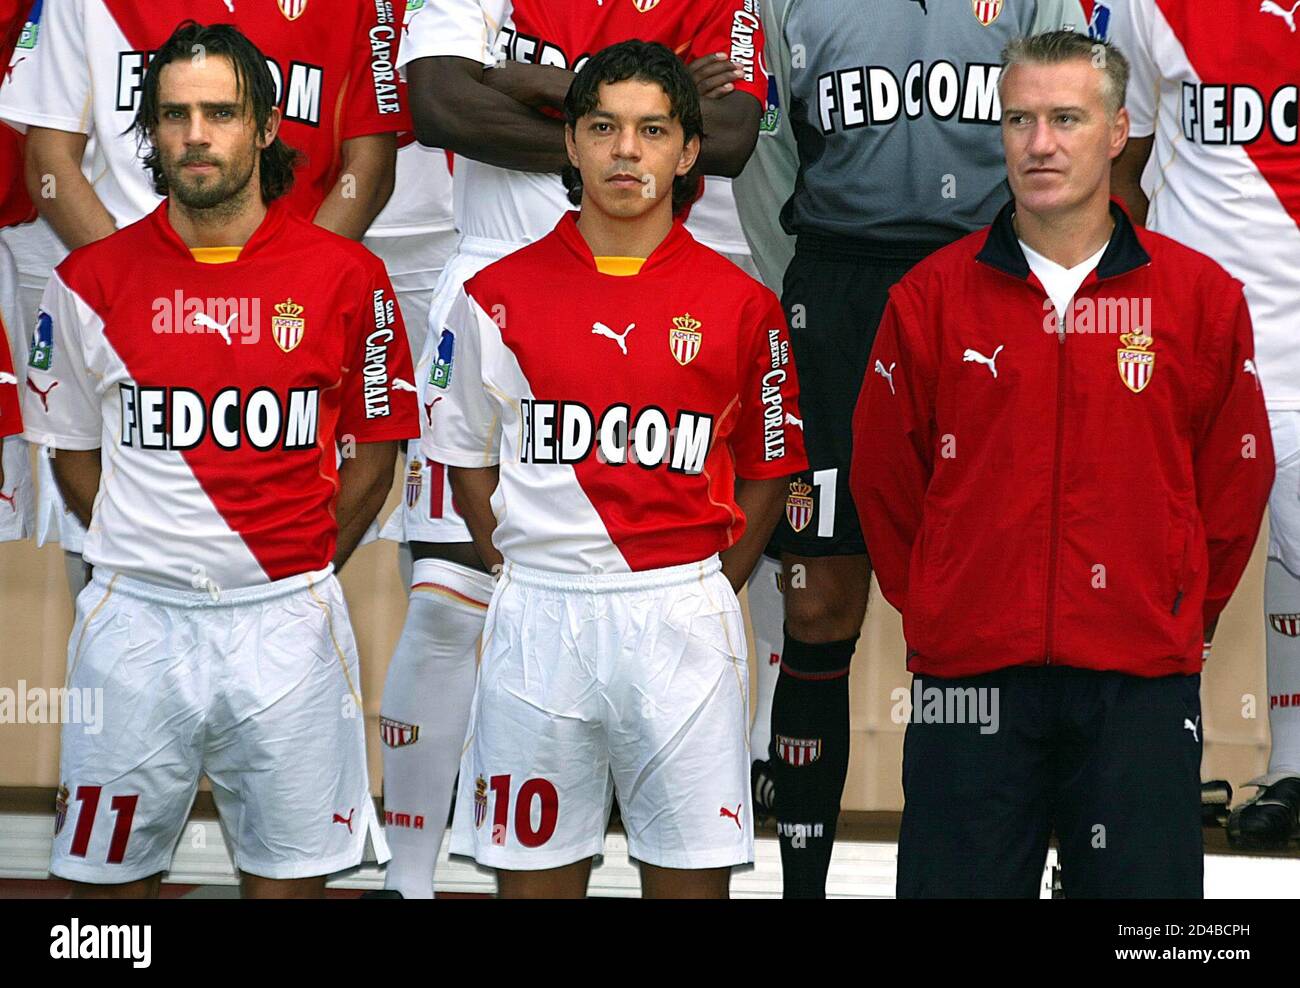 Monaco's soccer team coach Didier Deschamps (R) poses with Marcelo  Gaillardo of Argentina (C) and Marco Simone of Italy (L) during the  official photo session for the 2002-2003 French national league season